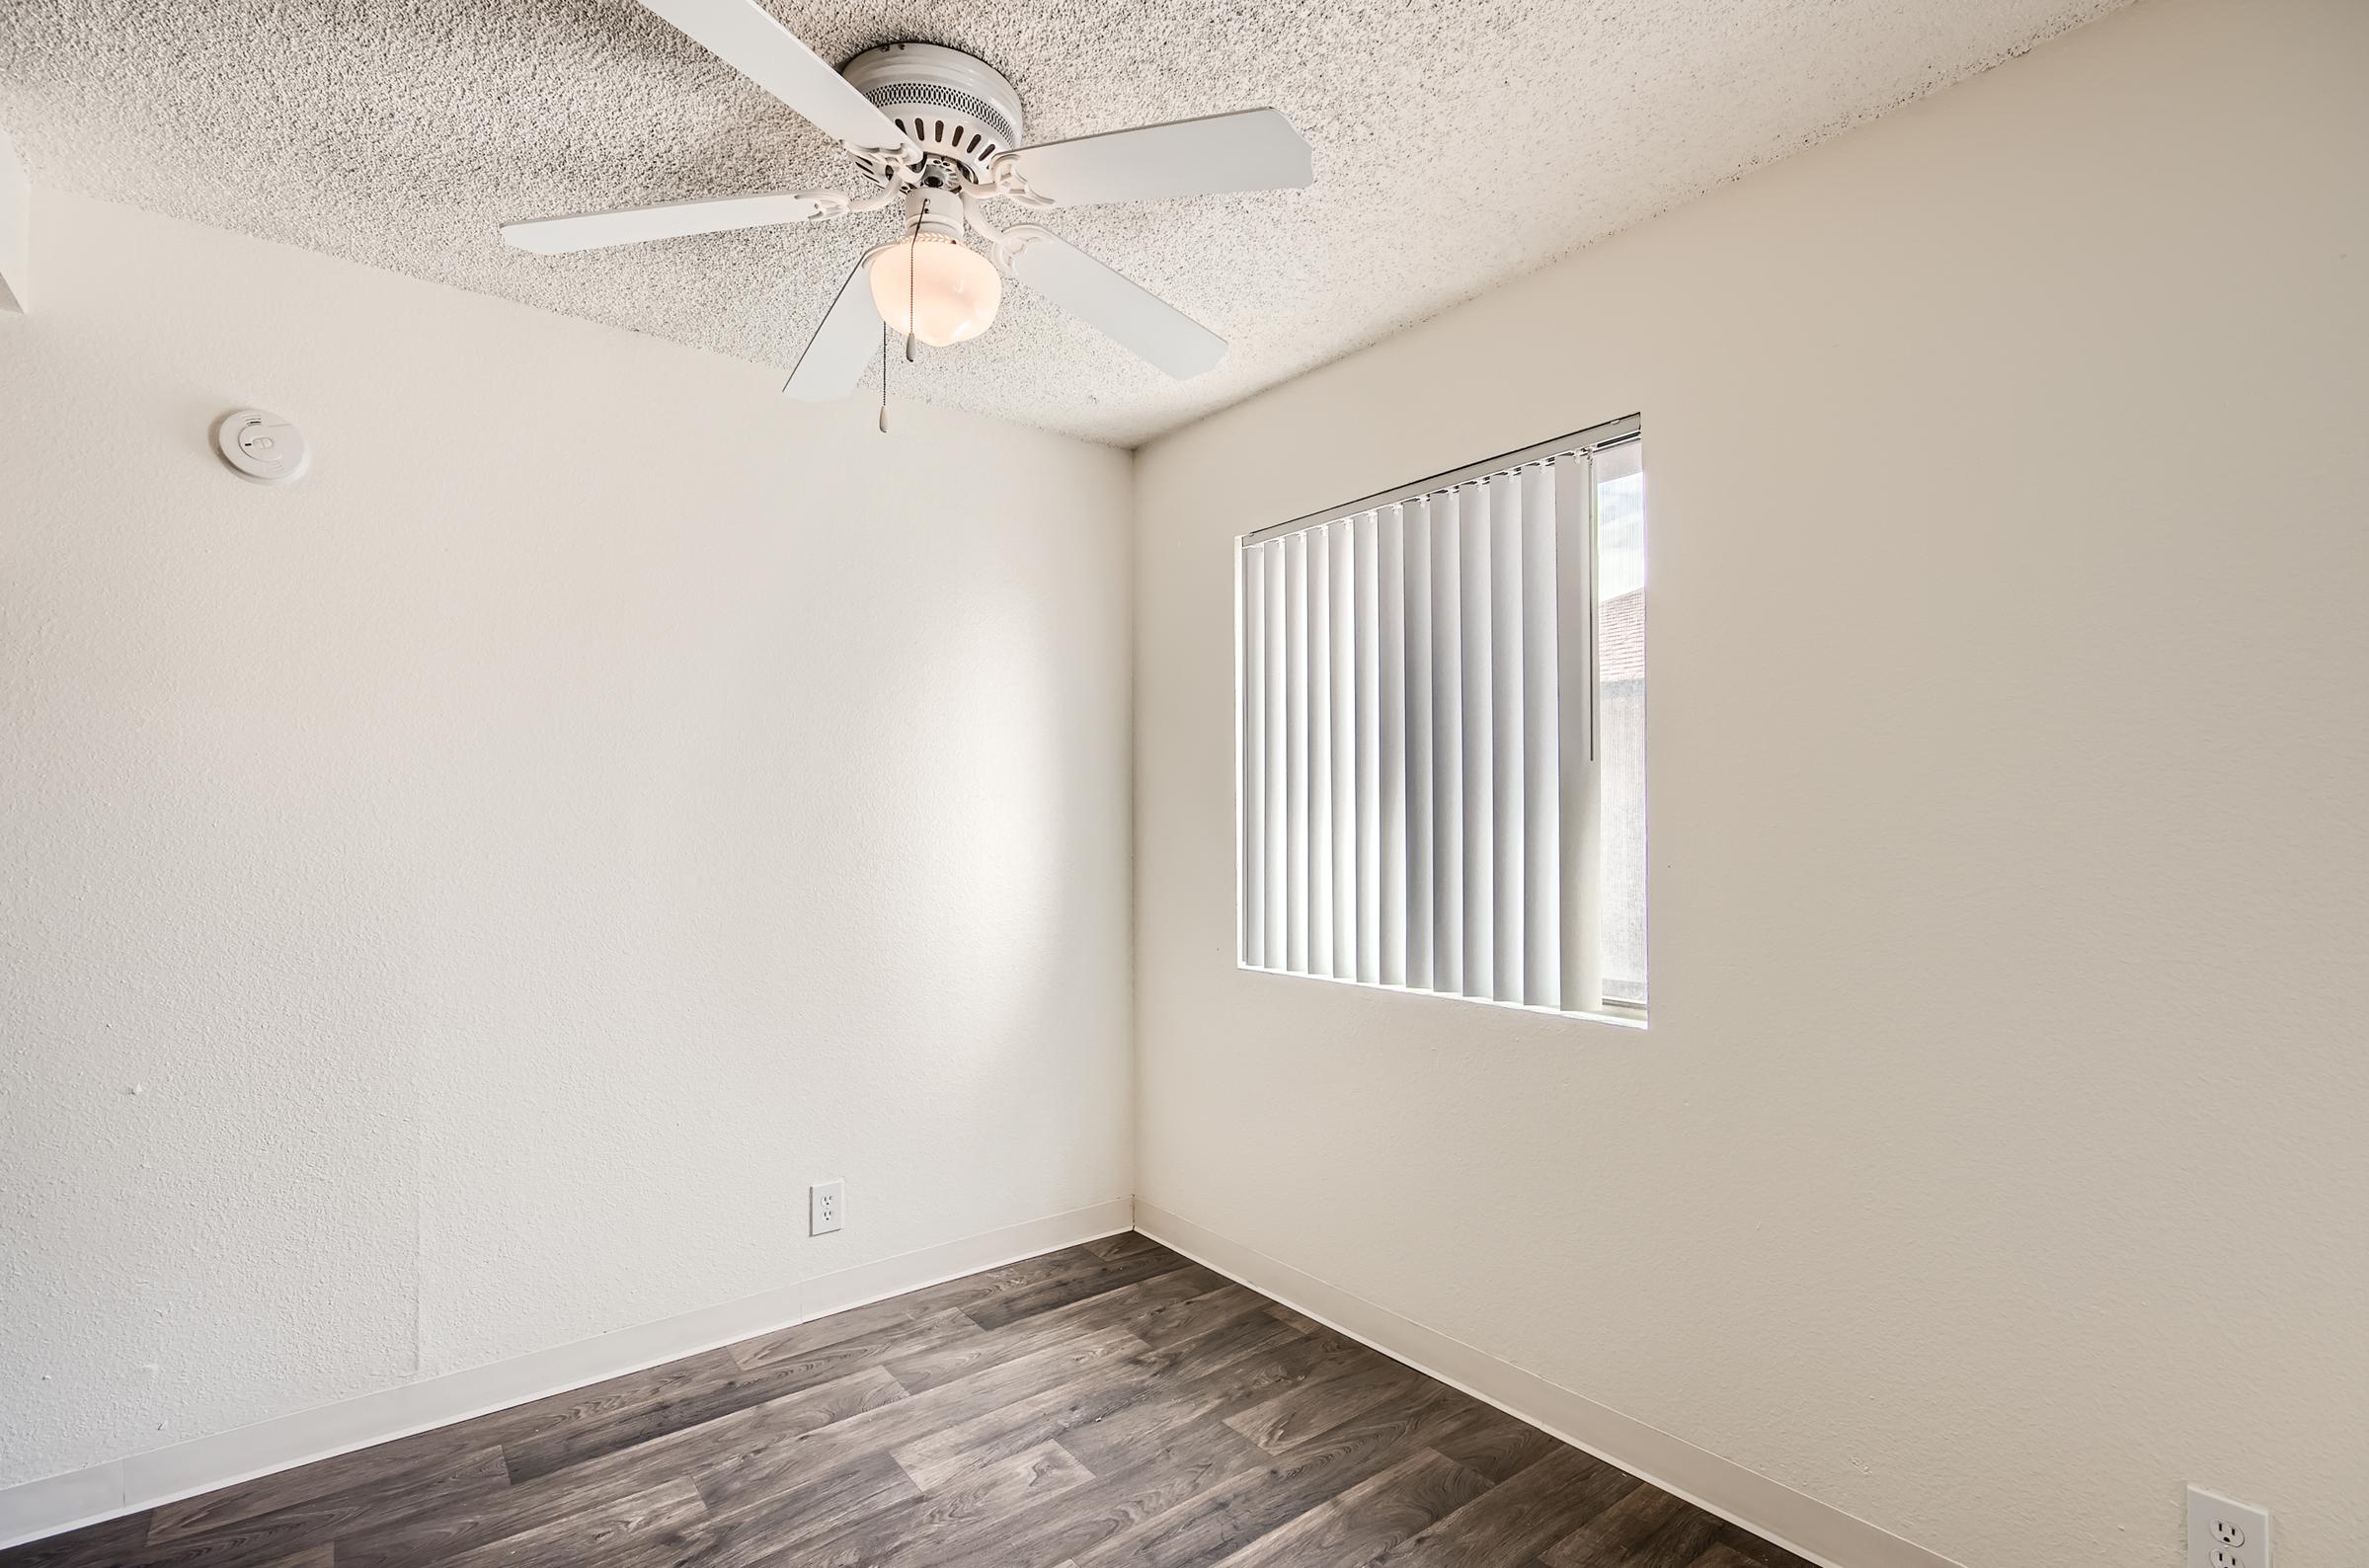 Corner view of an empty Mesa apartment bedroom with a window and ceiling fan